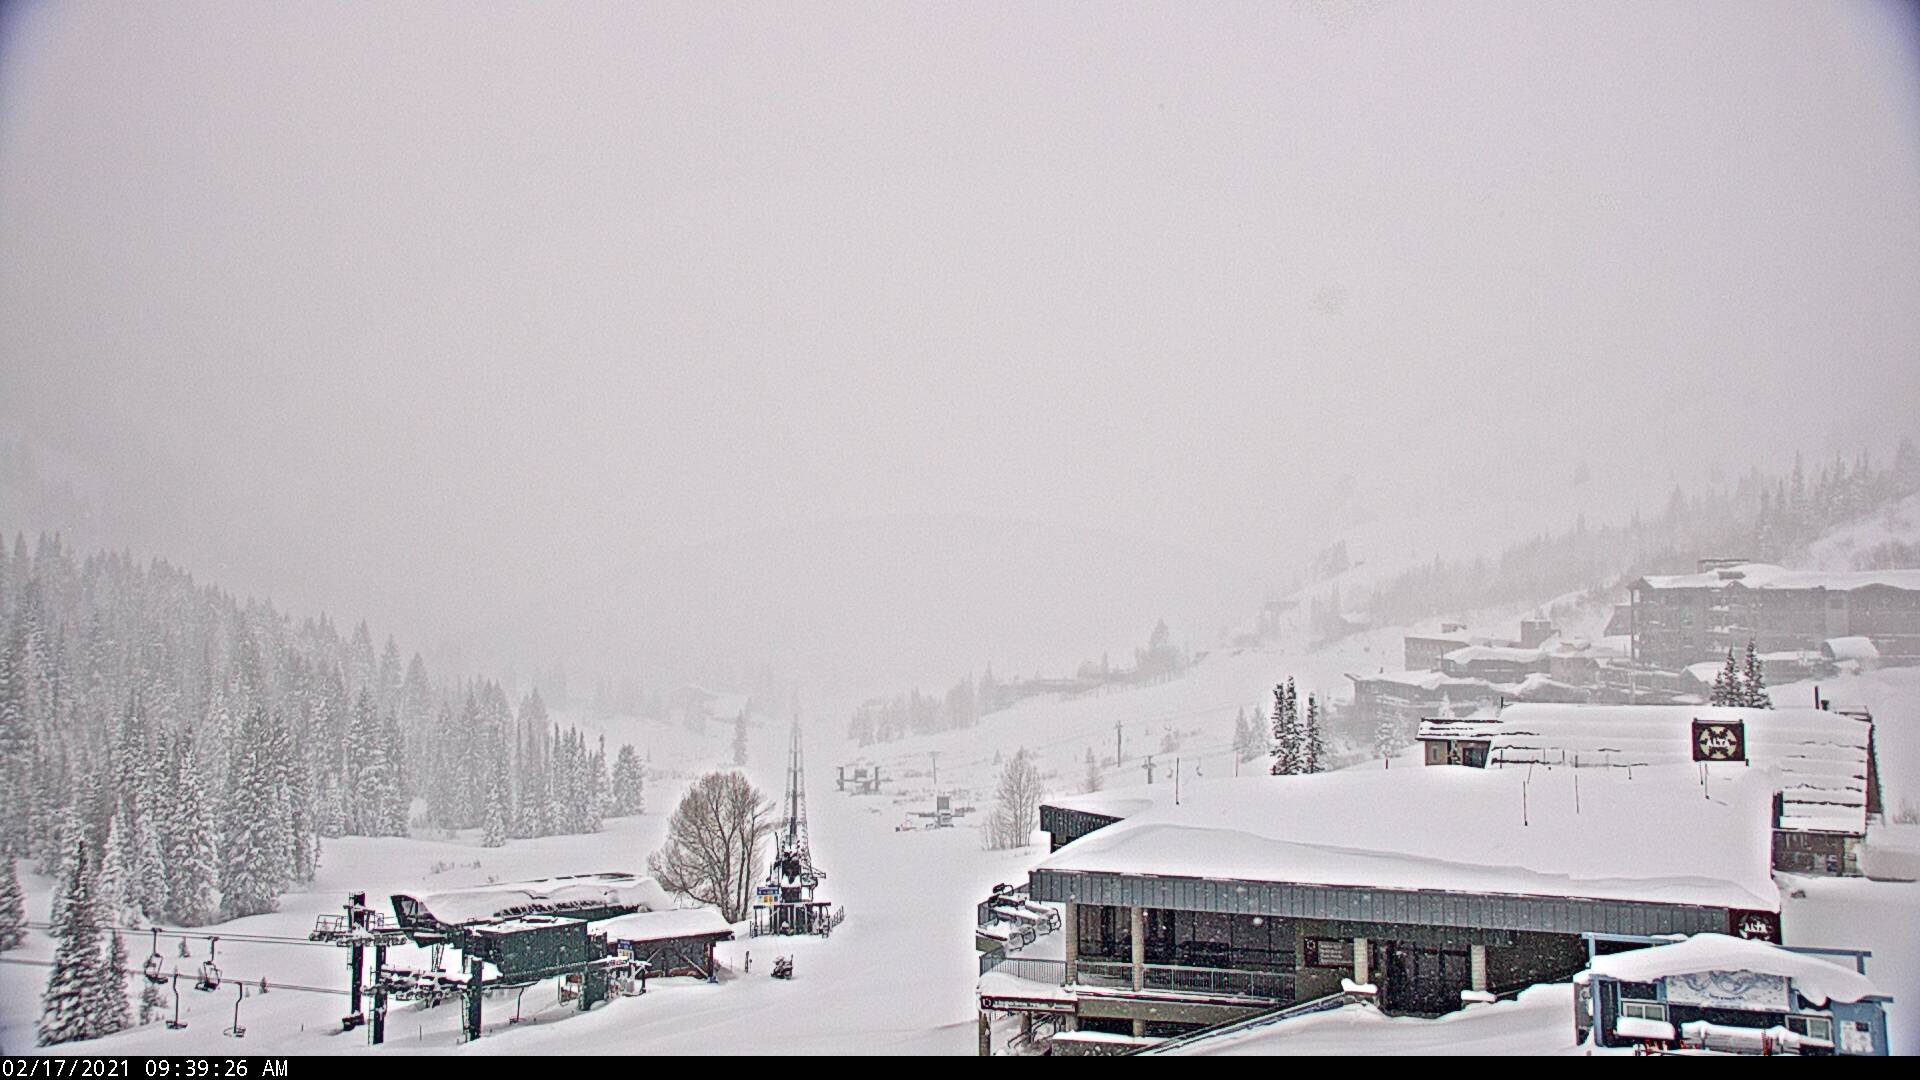 Those at Alta ski area are currently interlodged, meaning residents, employees and guests must remain indoors until given an all-clear of avalanche danger. According to Alta ski area's website, the all-time record consecutive interlodge was 52 hours during the 2019-20 ski season.